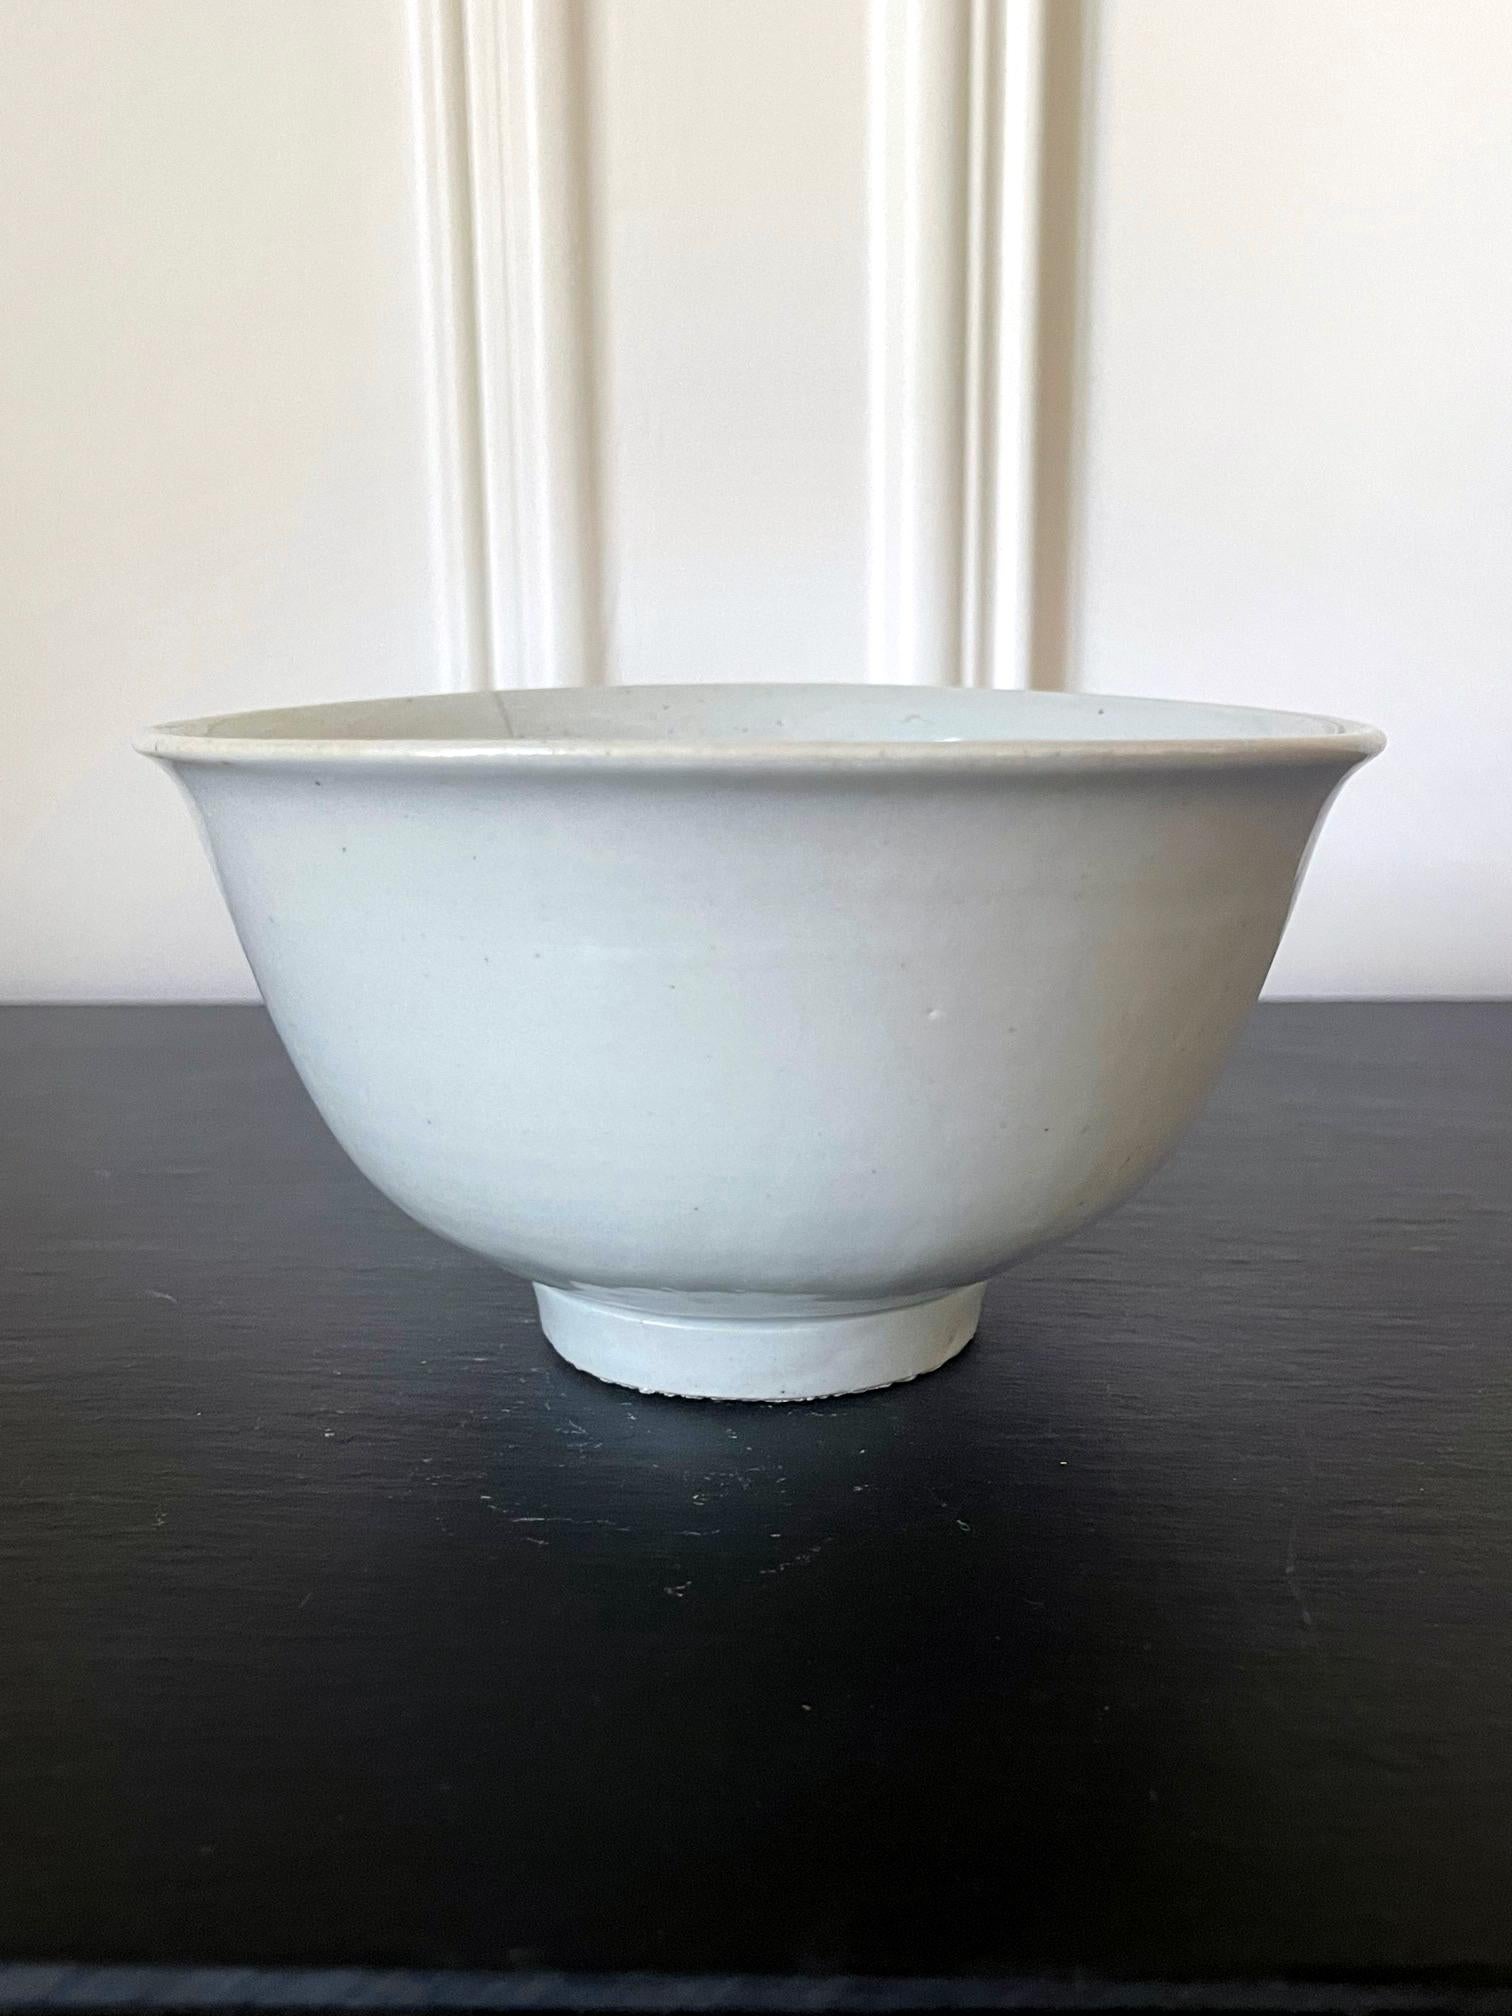 A Korean ceramic bowl covered in a white glaze with a hint of bluish green circa 18th-19th century, later Joseon Dynasty. The deep bowl features a classic form, simple but elegant with everted rim and cylindrical foot ring. The glaze was evenly